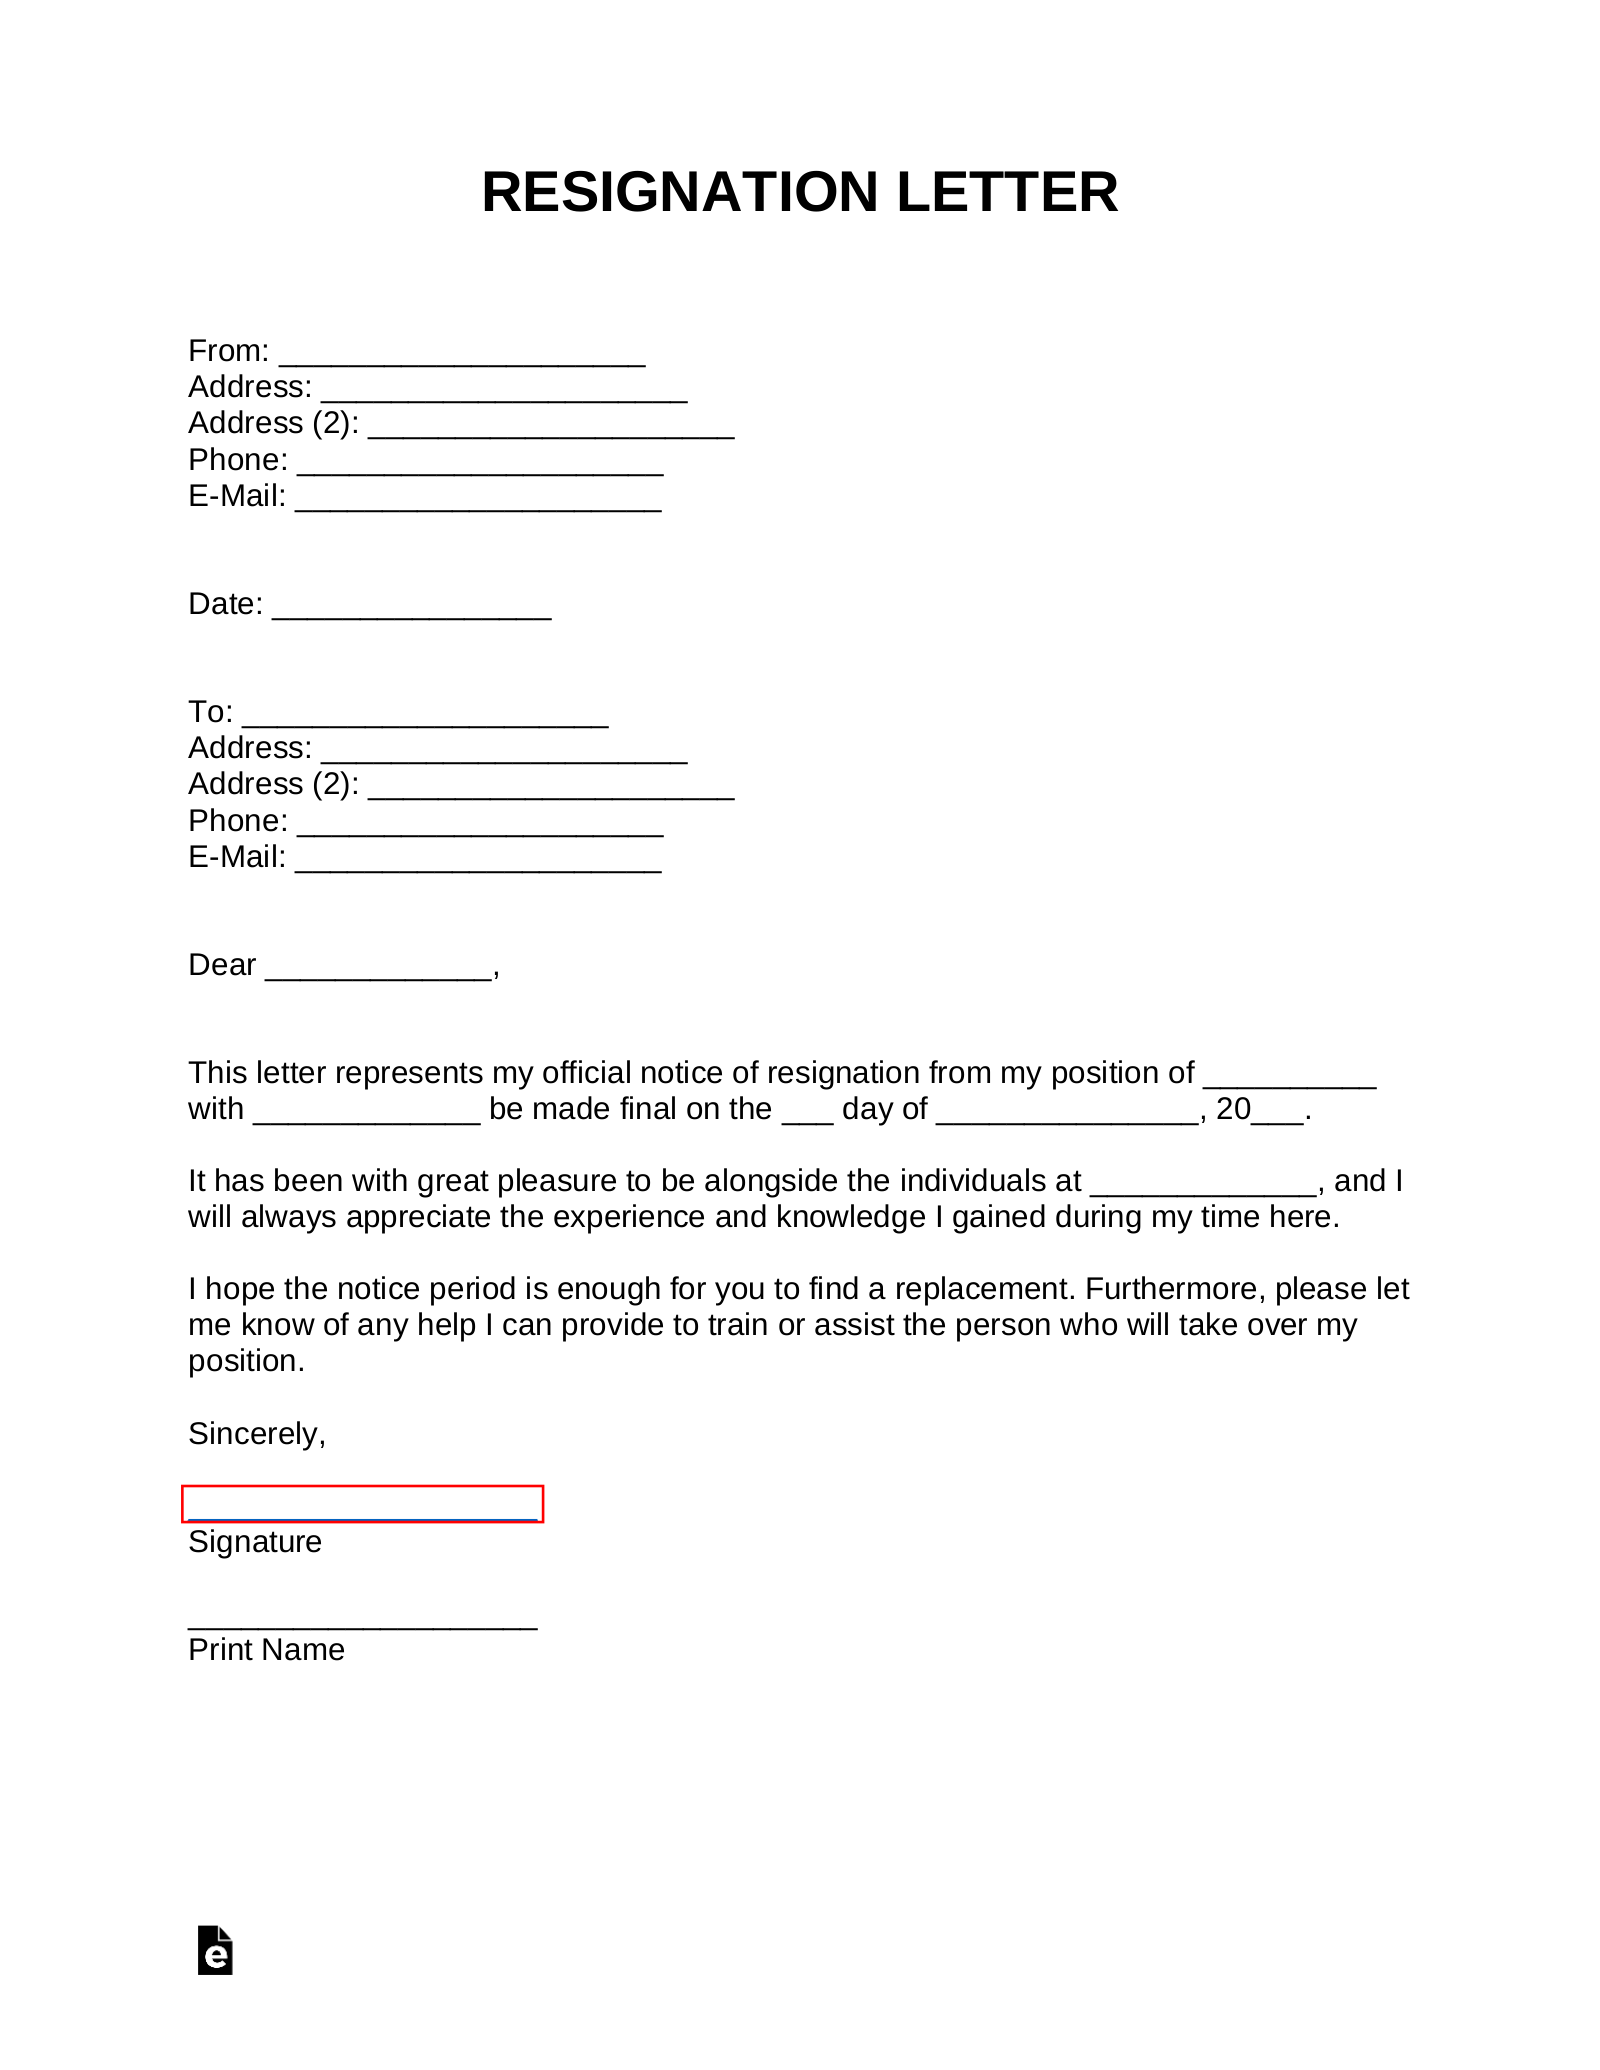 Template Of Resignation Letter from eforms.com